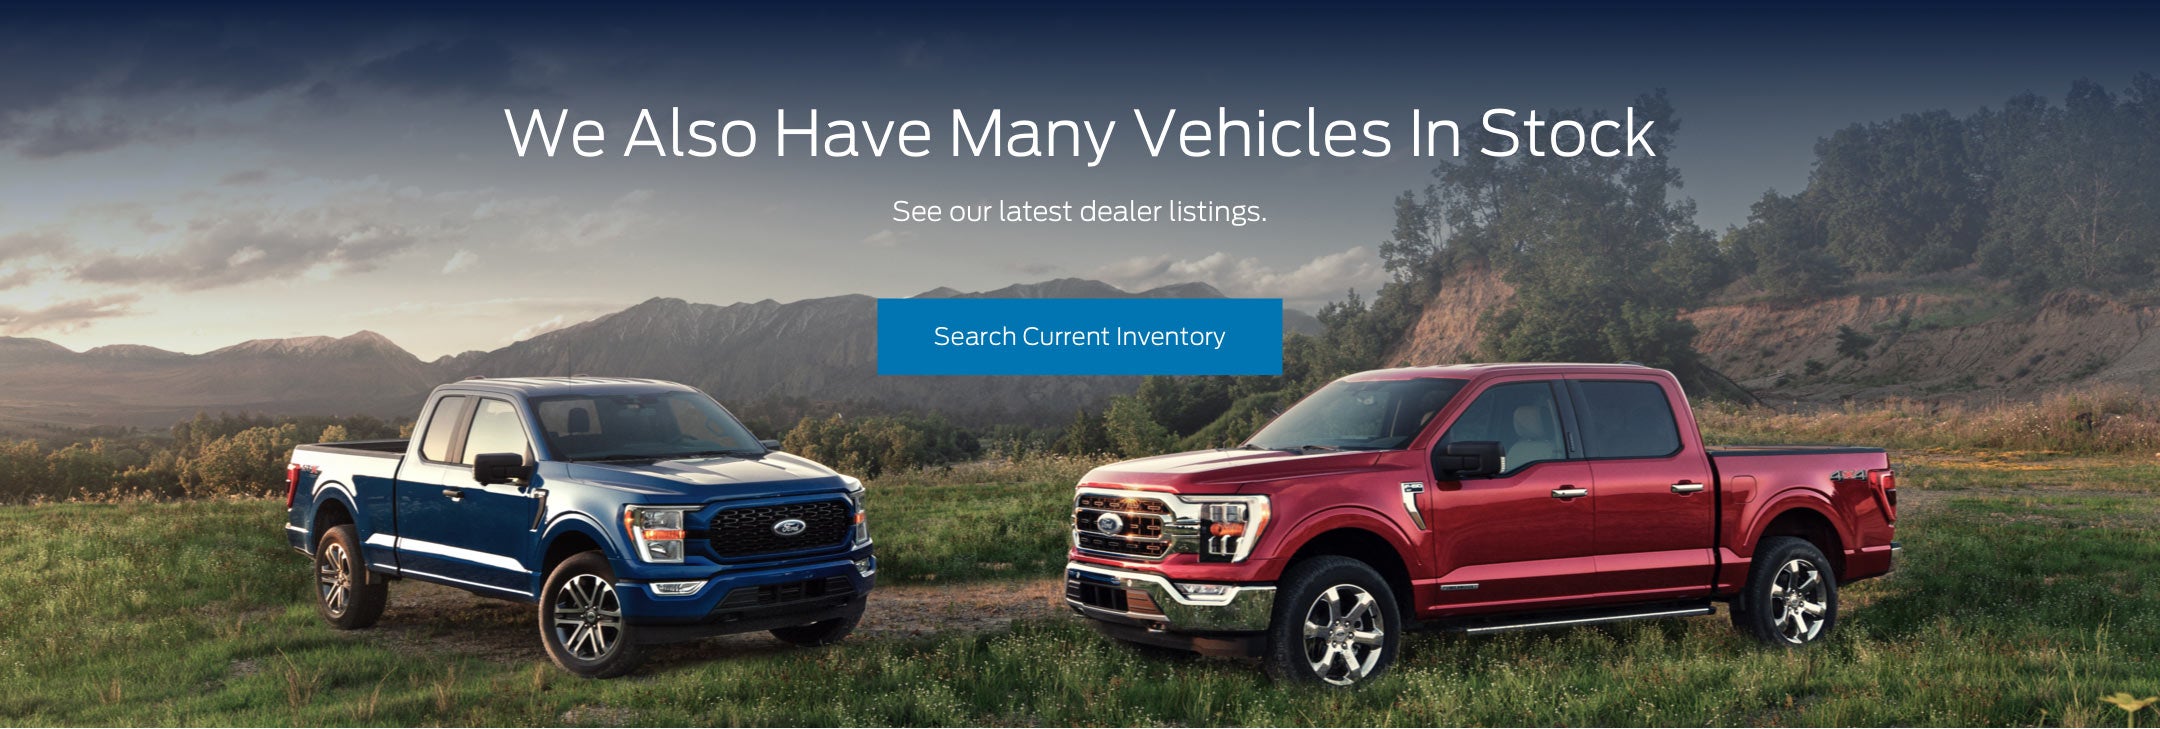 Ford vehicles in stock | Capitol Ford in Charleston WV